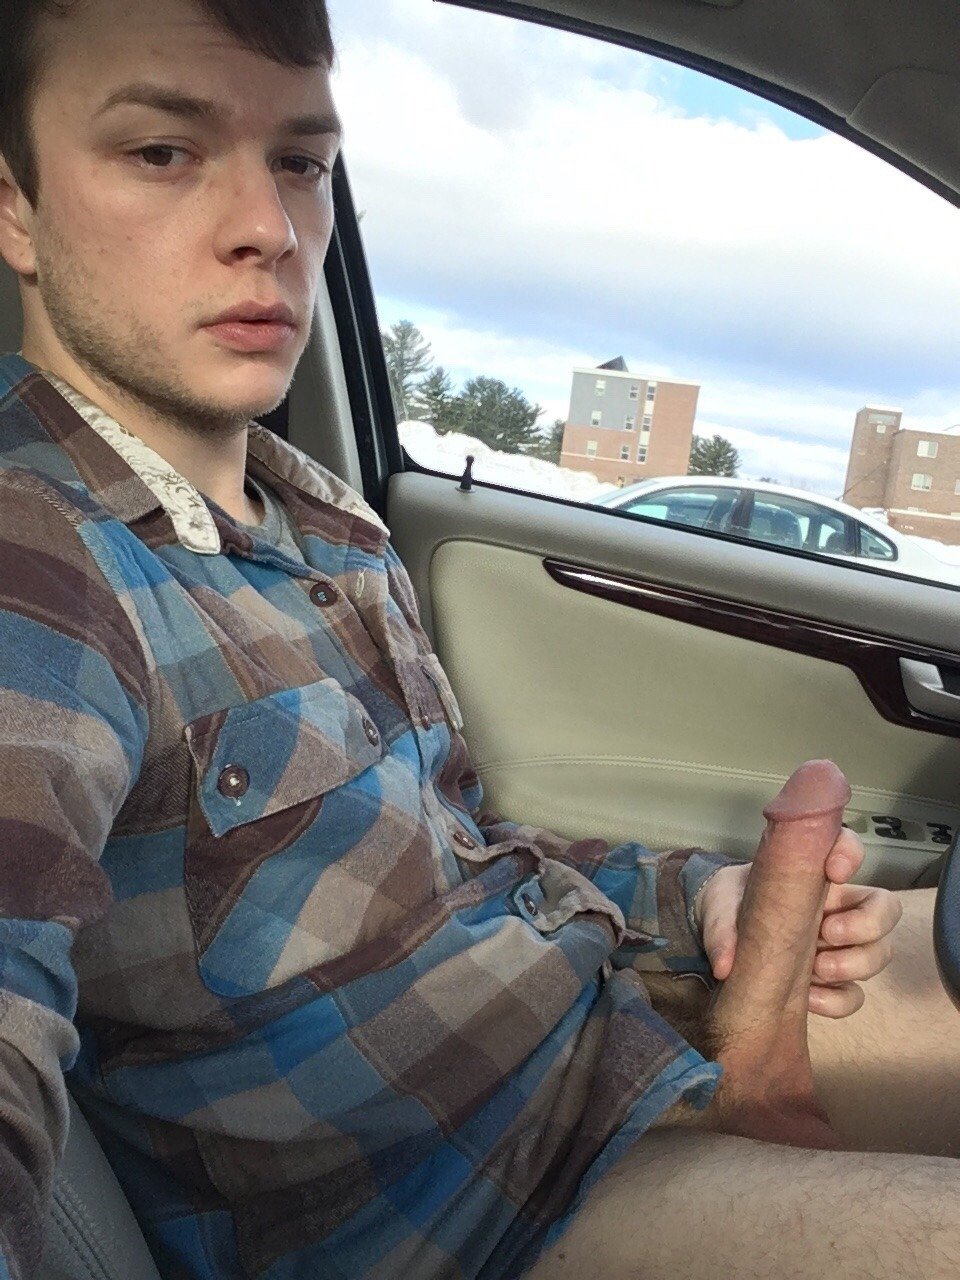 Watch the Photo by supaflexboi with the username @supaflexboi, who is a verified user, posted on February 13, 2019 and the text says 'Car boner'